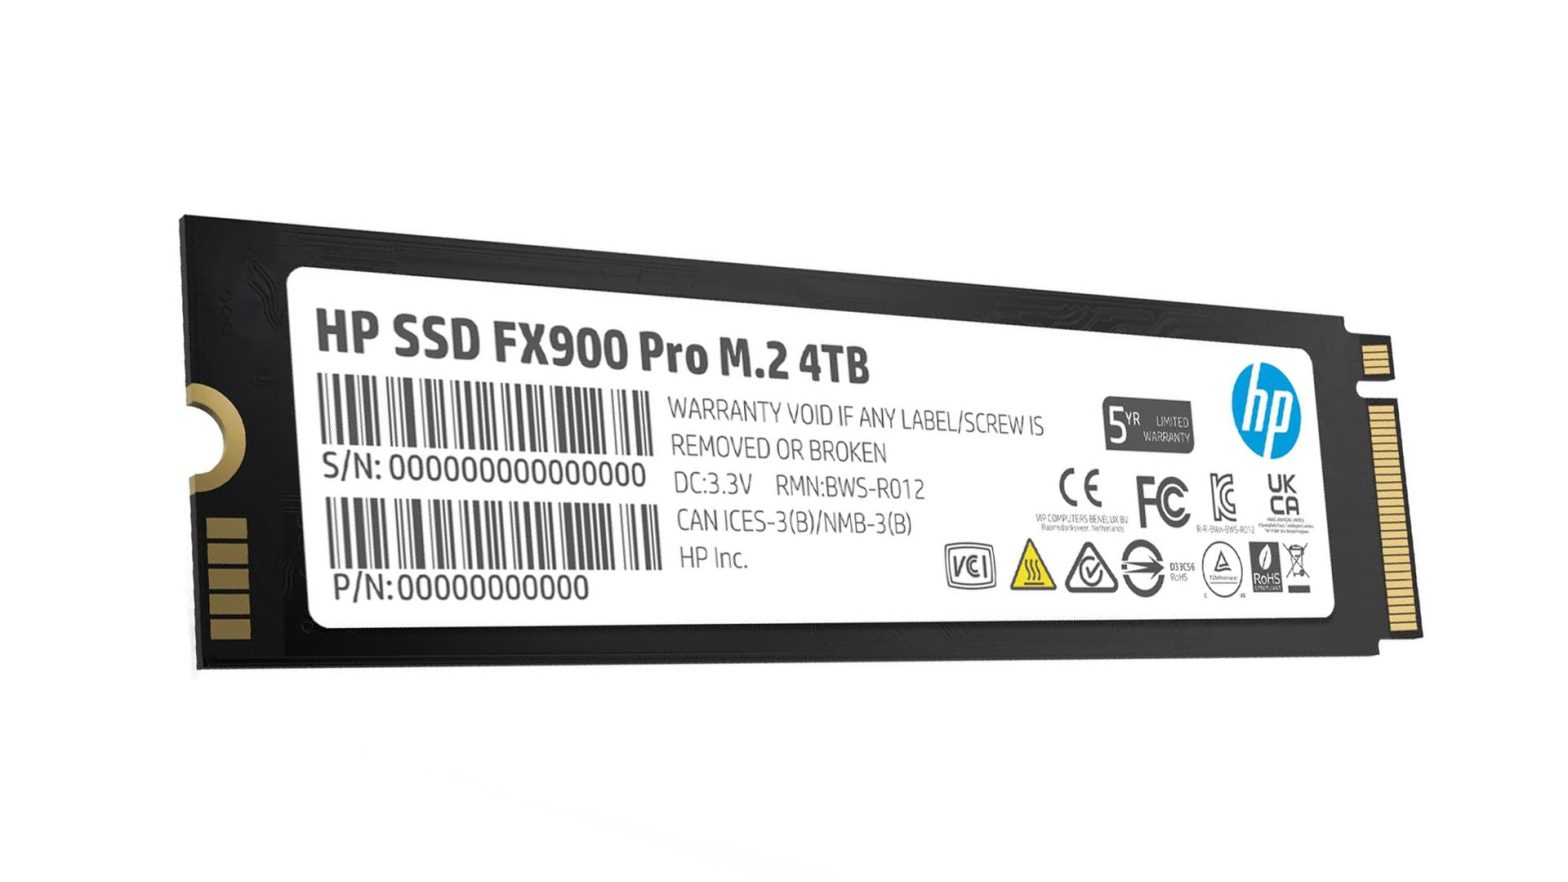 HP FX900 Pro 4TB SSD drops down to just $212.99 on Amazon